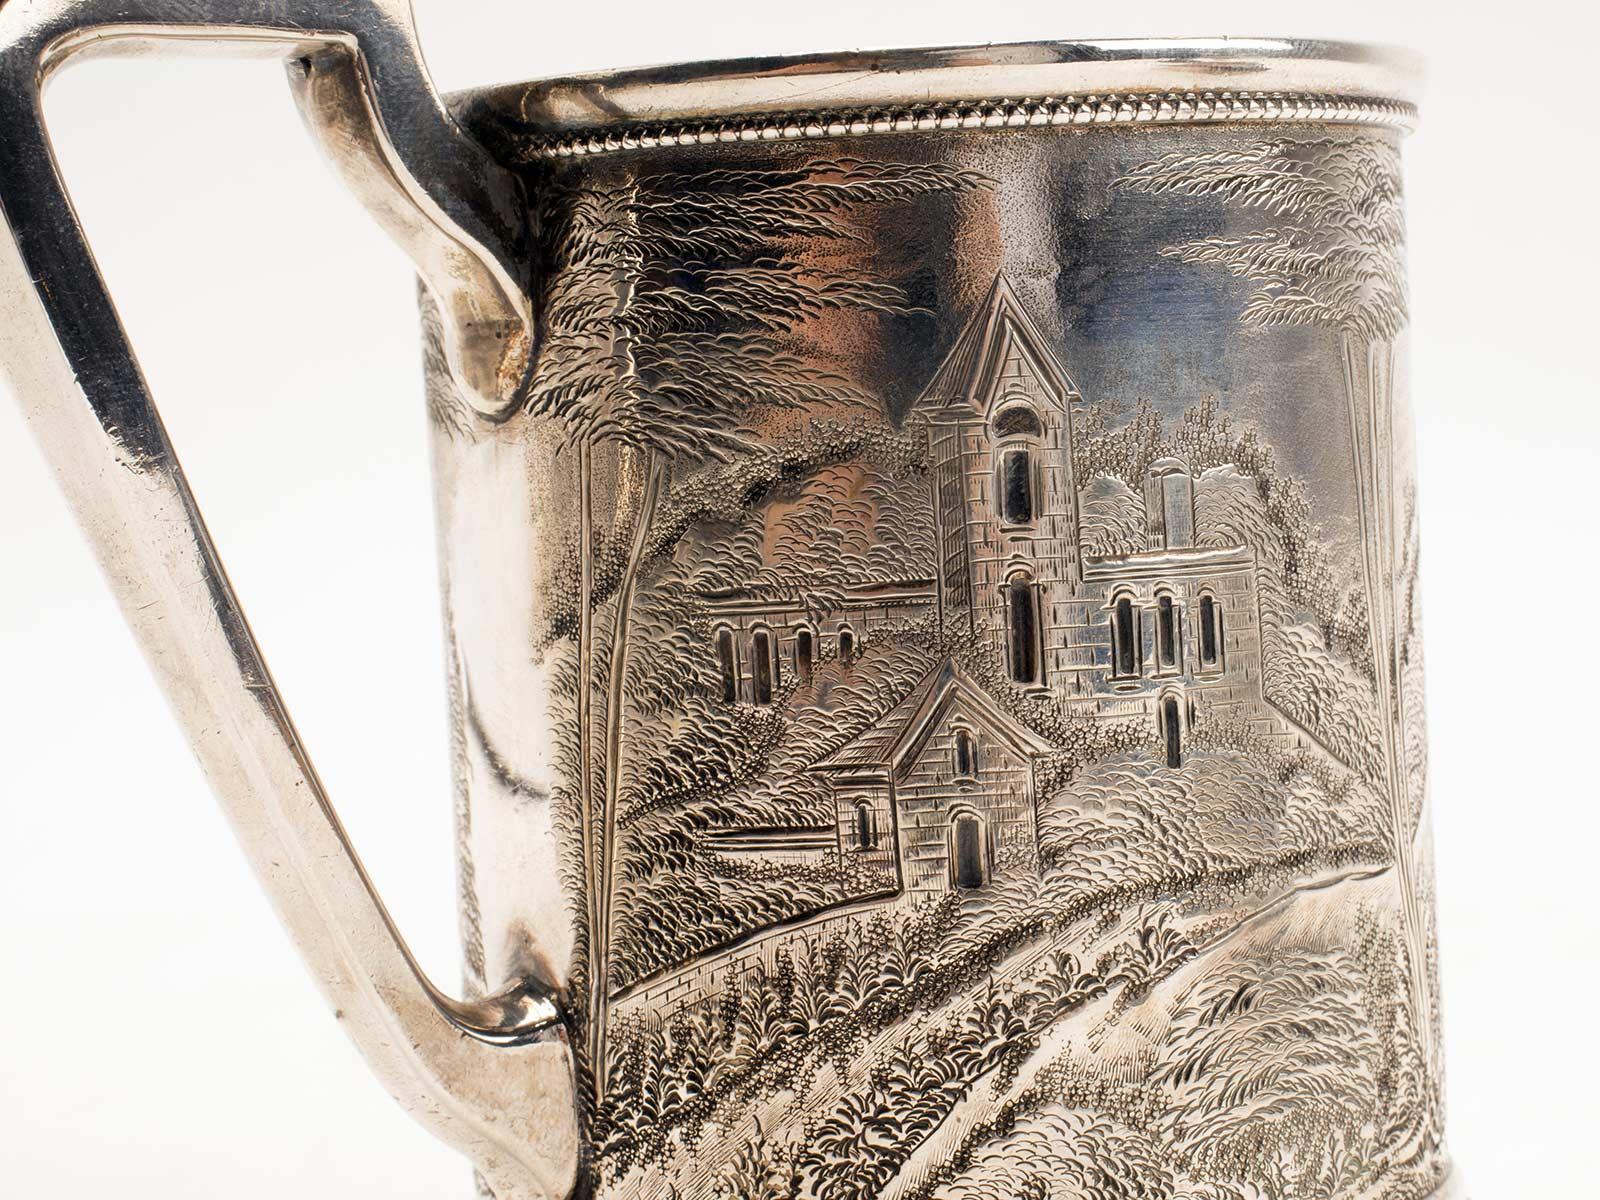 American Sterling Silver Mug, Embossed, Depicting Monuments and Architecture, USA, 1890